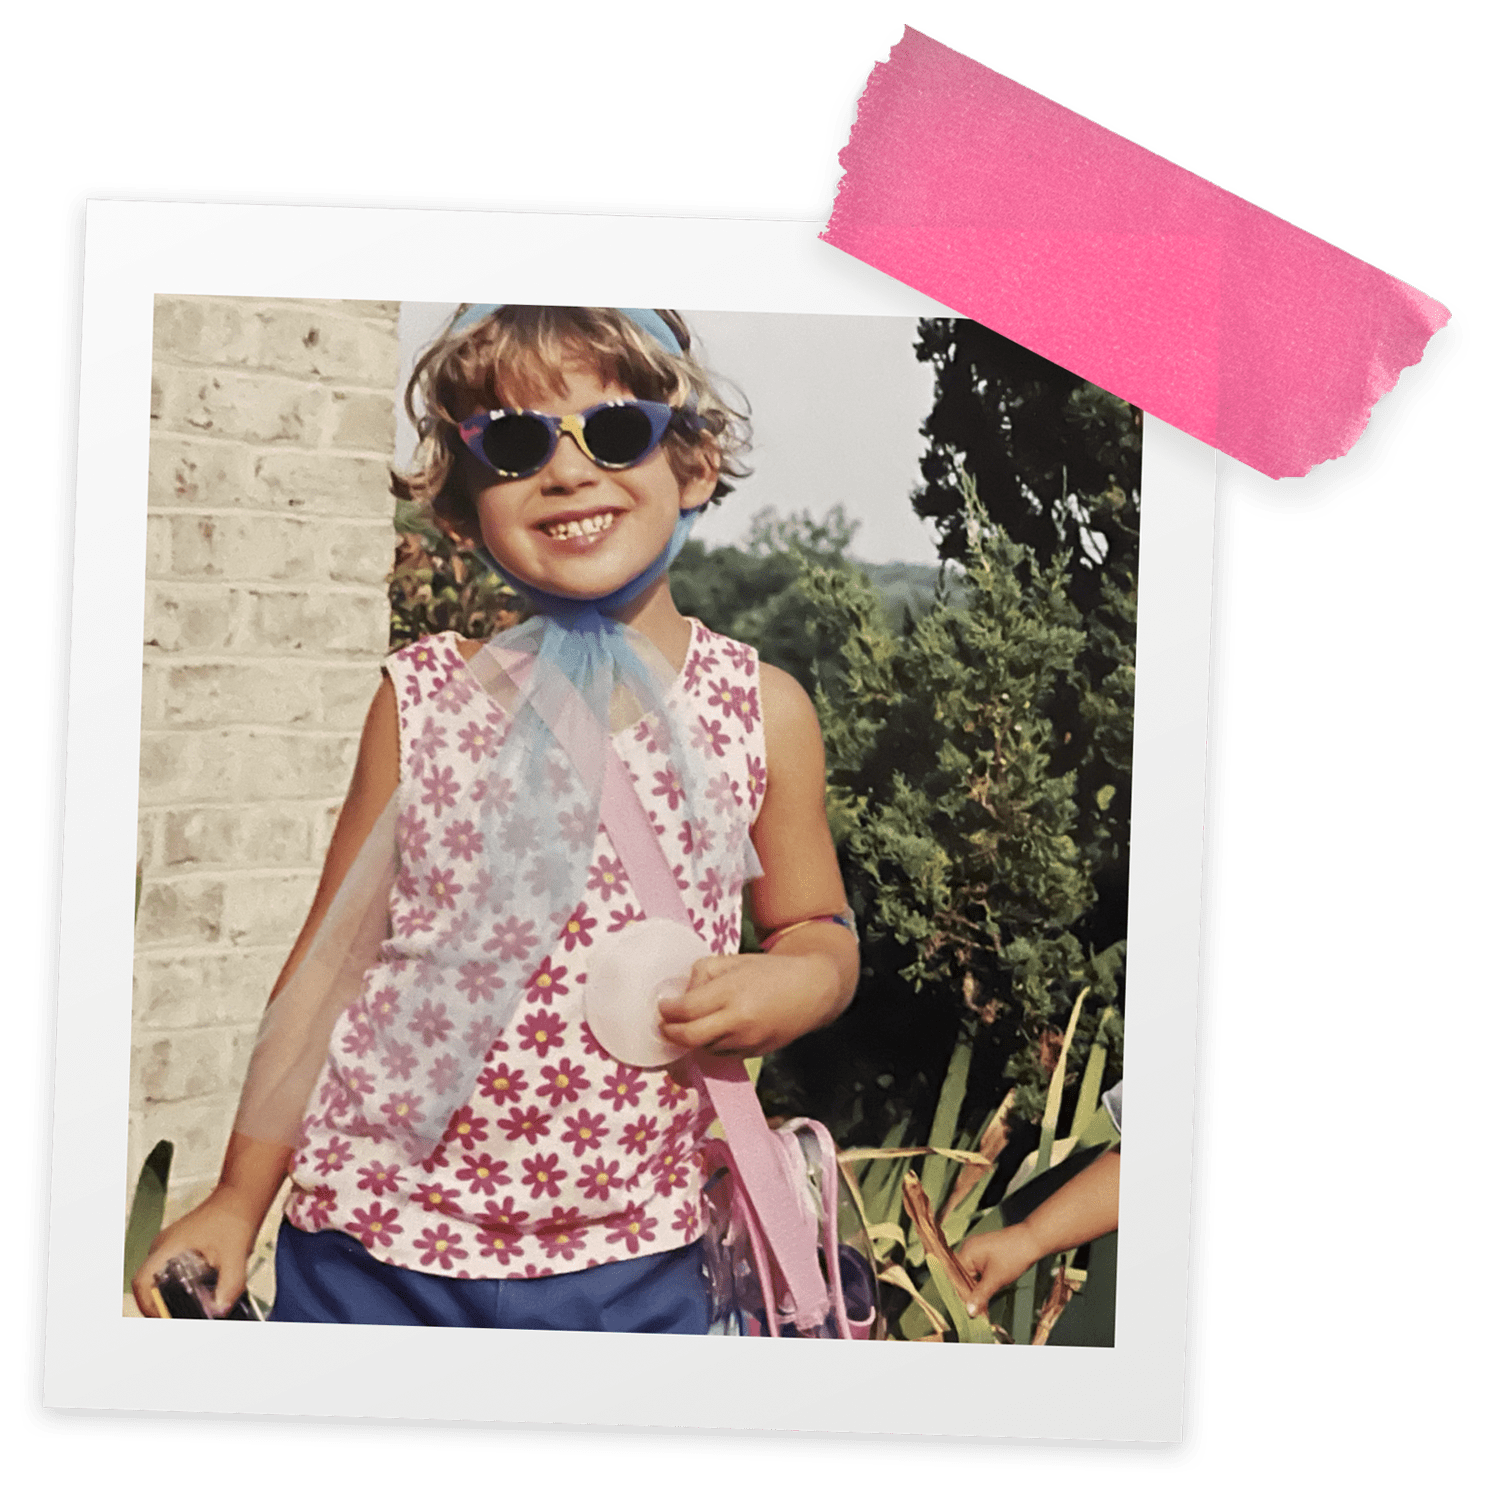 A young girl wearing sunglasses and holding a pink purse.